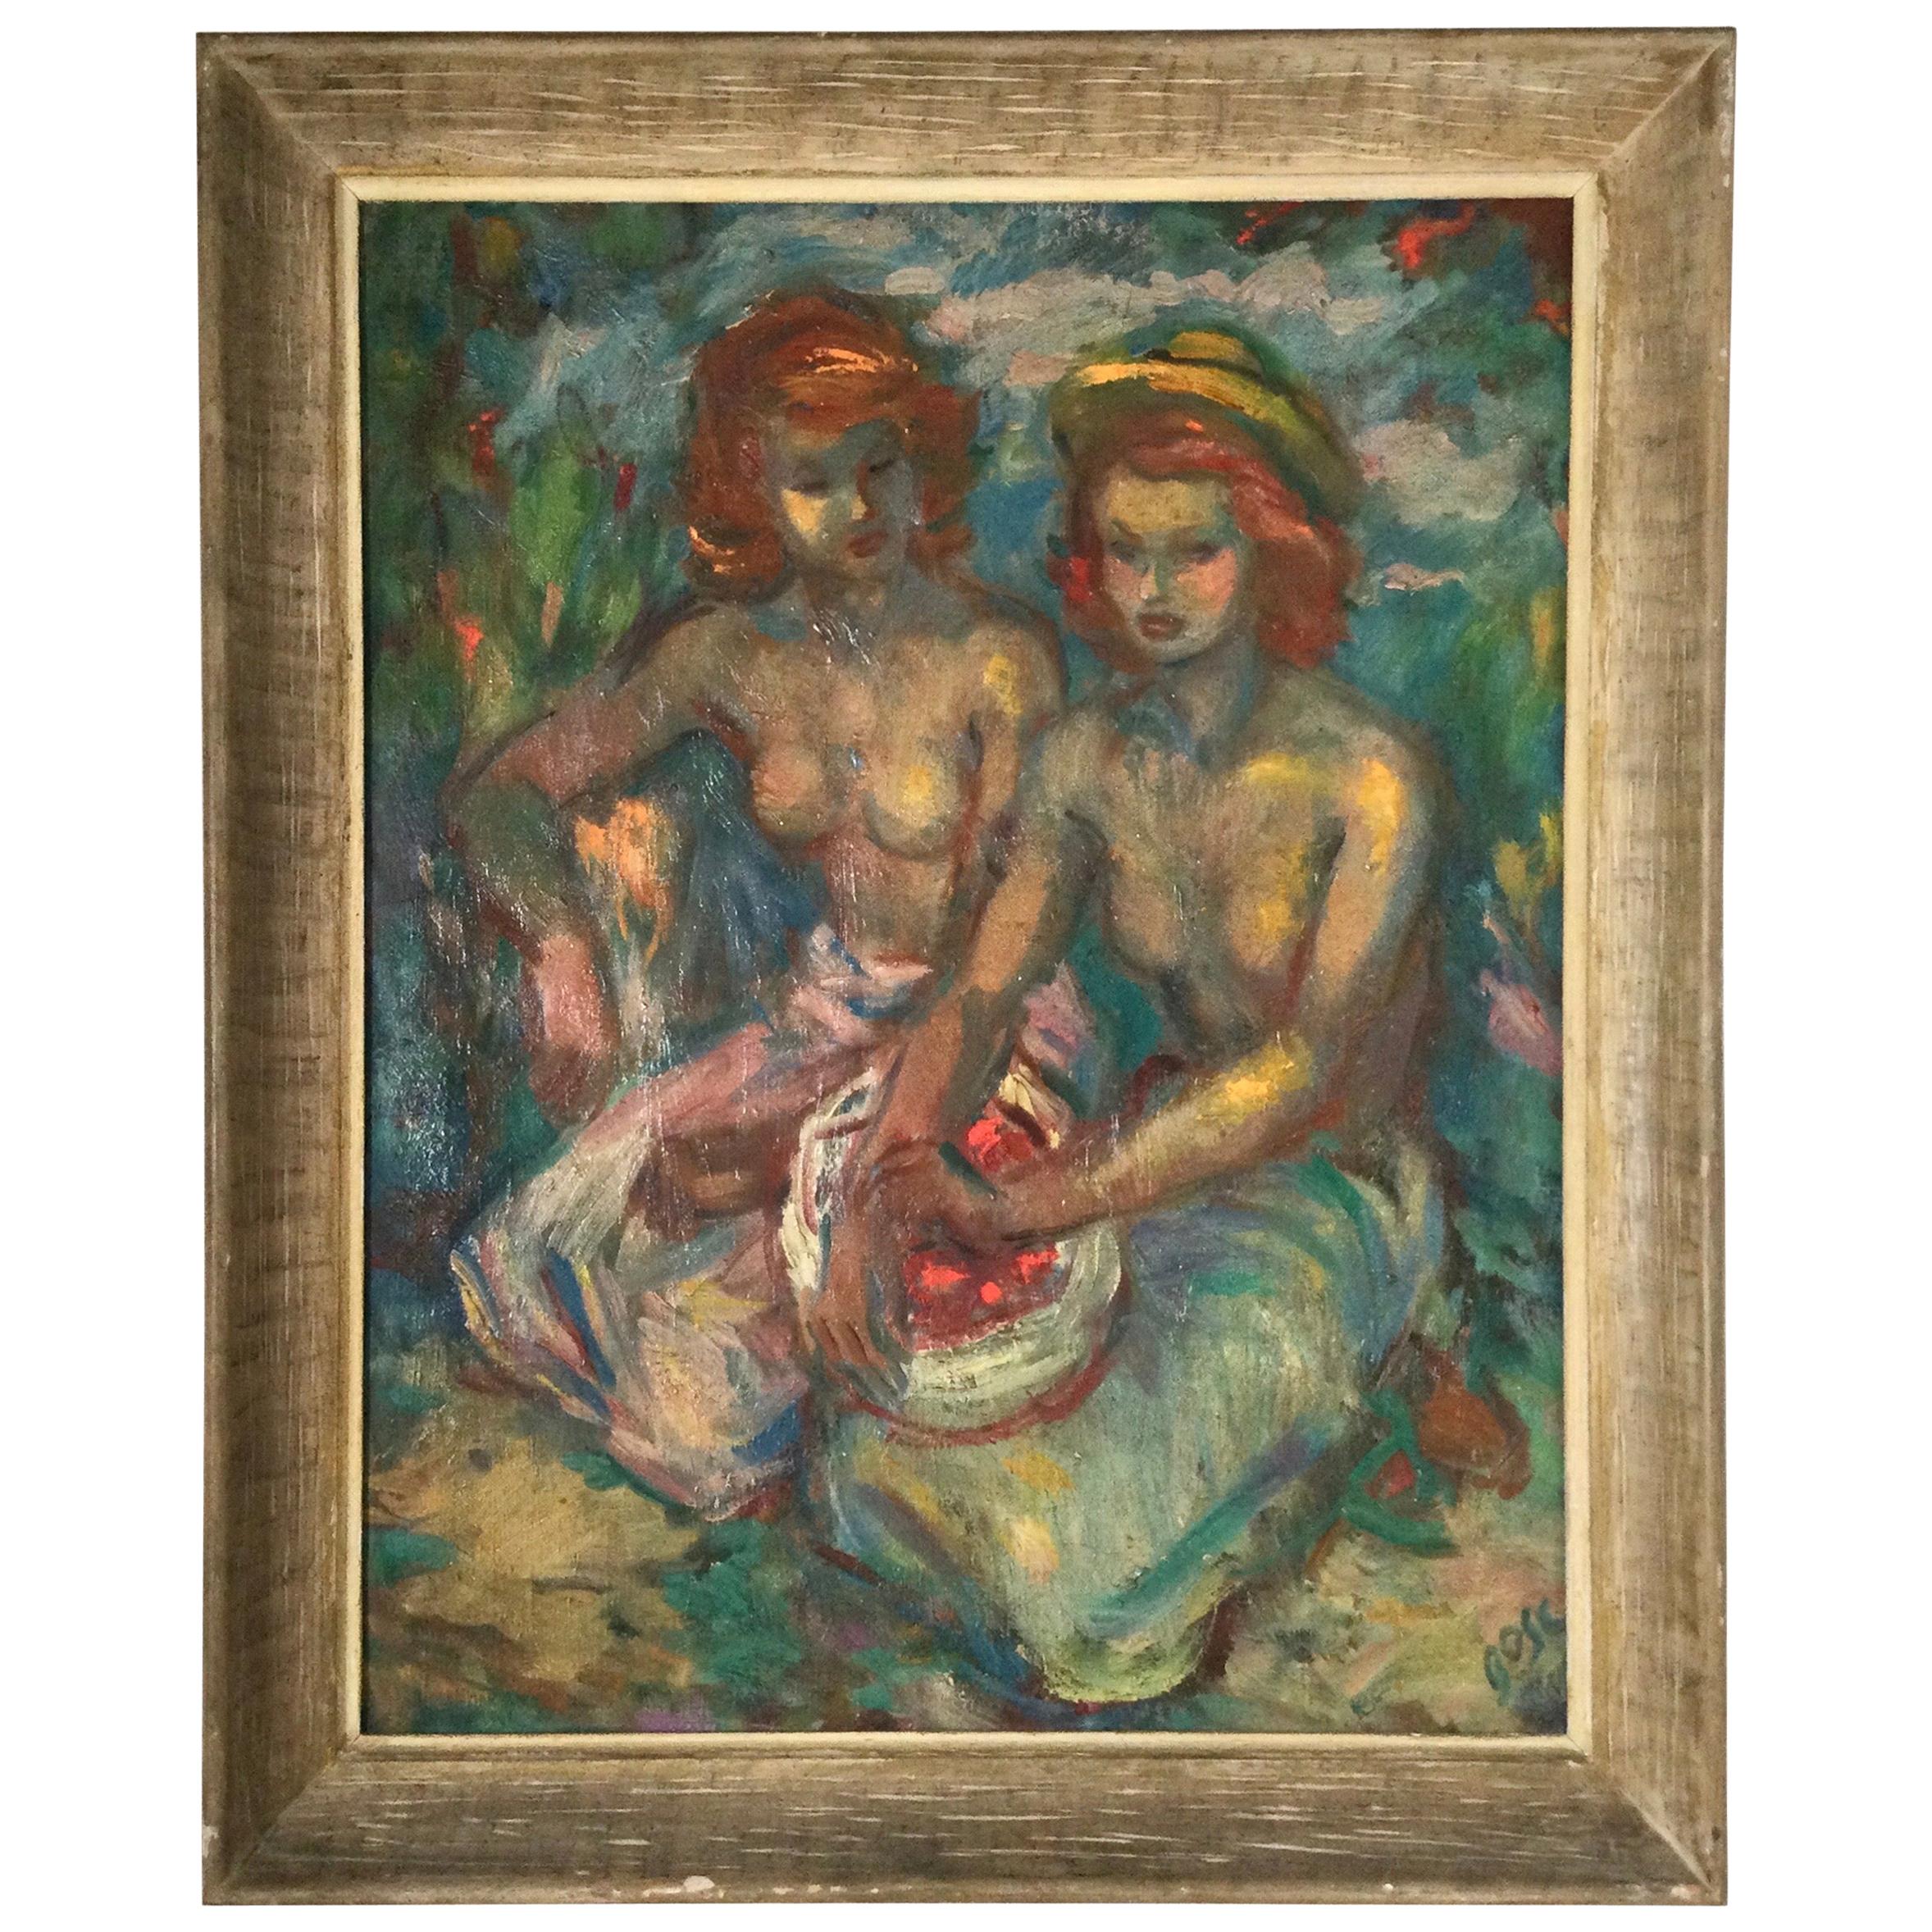 Bosc "Two Seated Women" Signed Painting Oil on Canvas